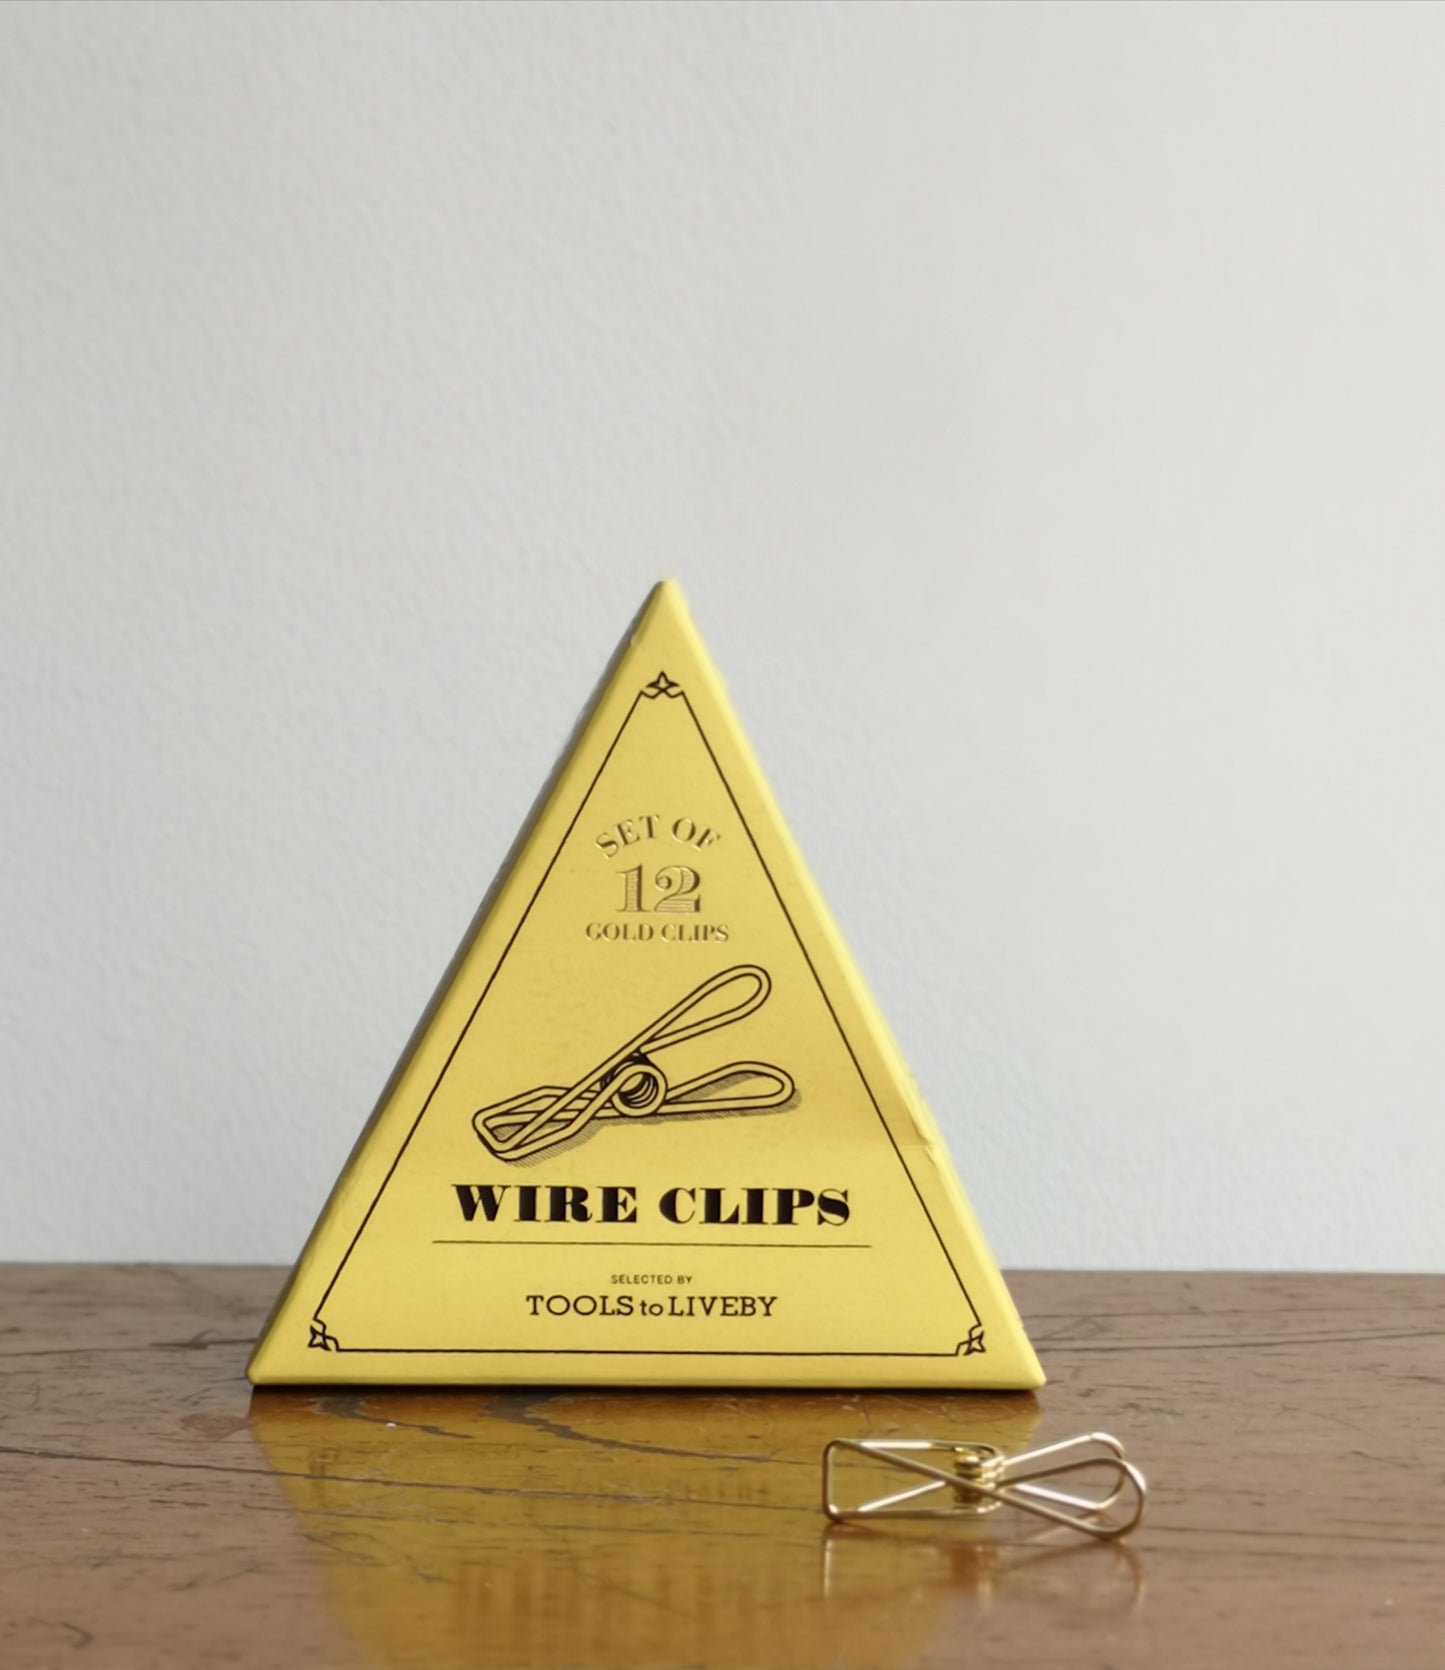 Wire clips